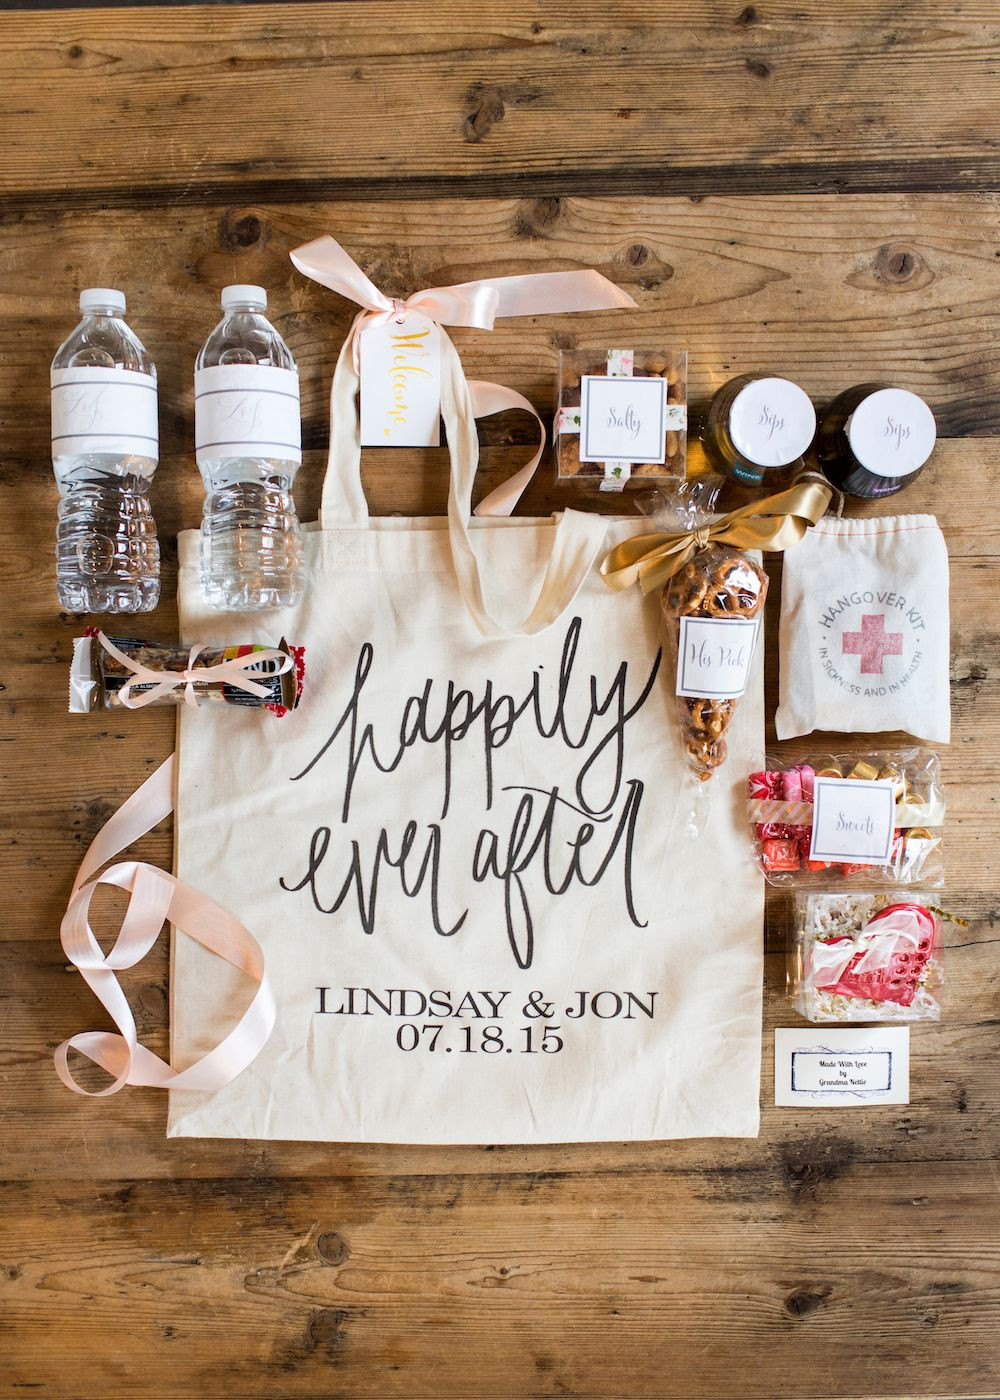 Wedding Welcome Gift Bags
 Wedding Wednesday What We Put in Our Wedding Wel e Bags